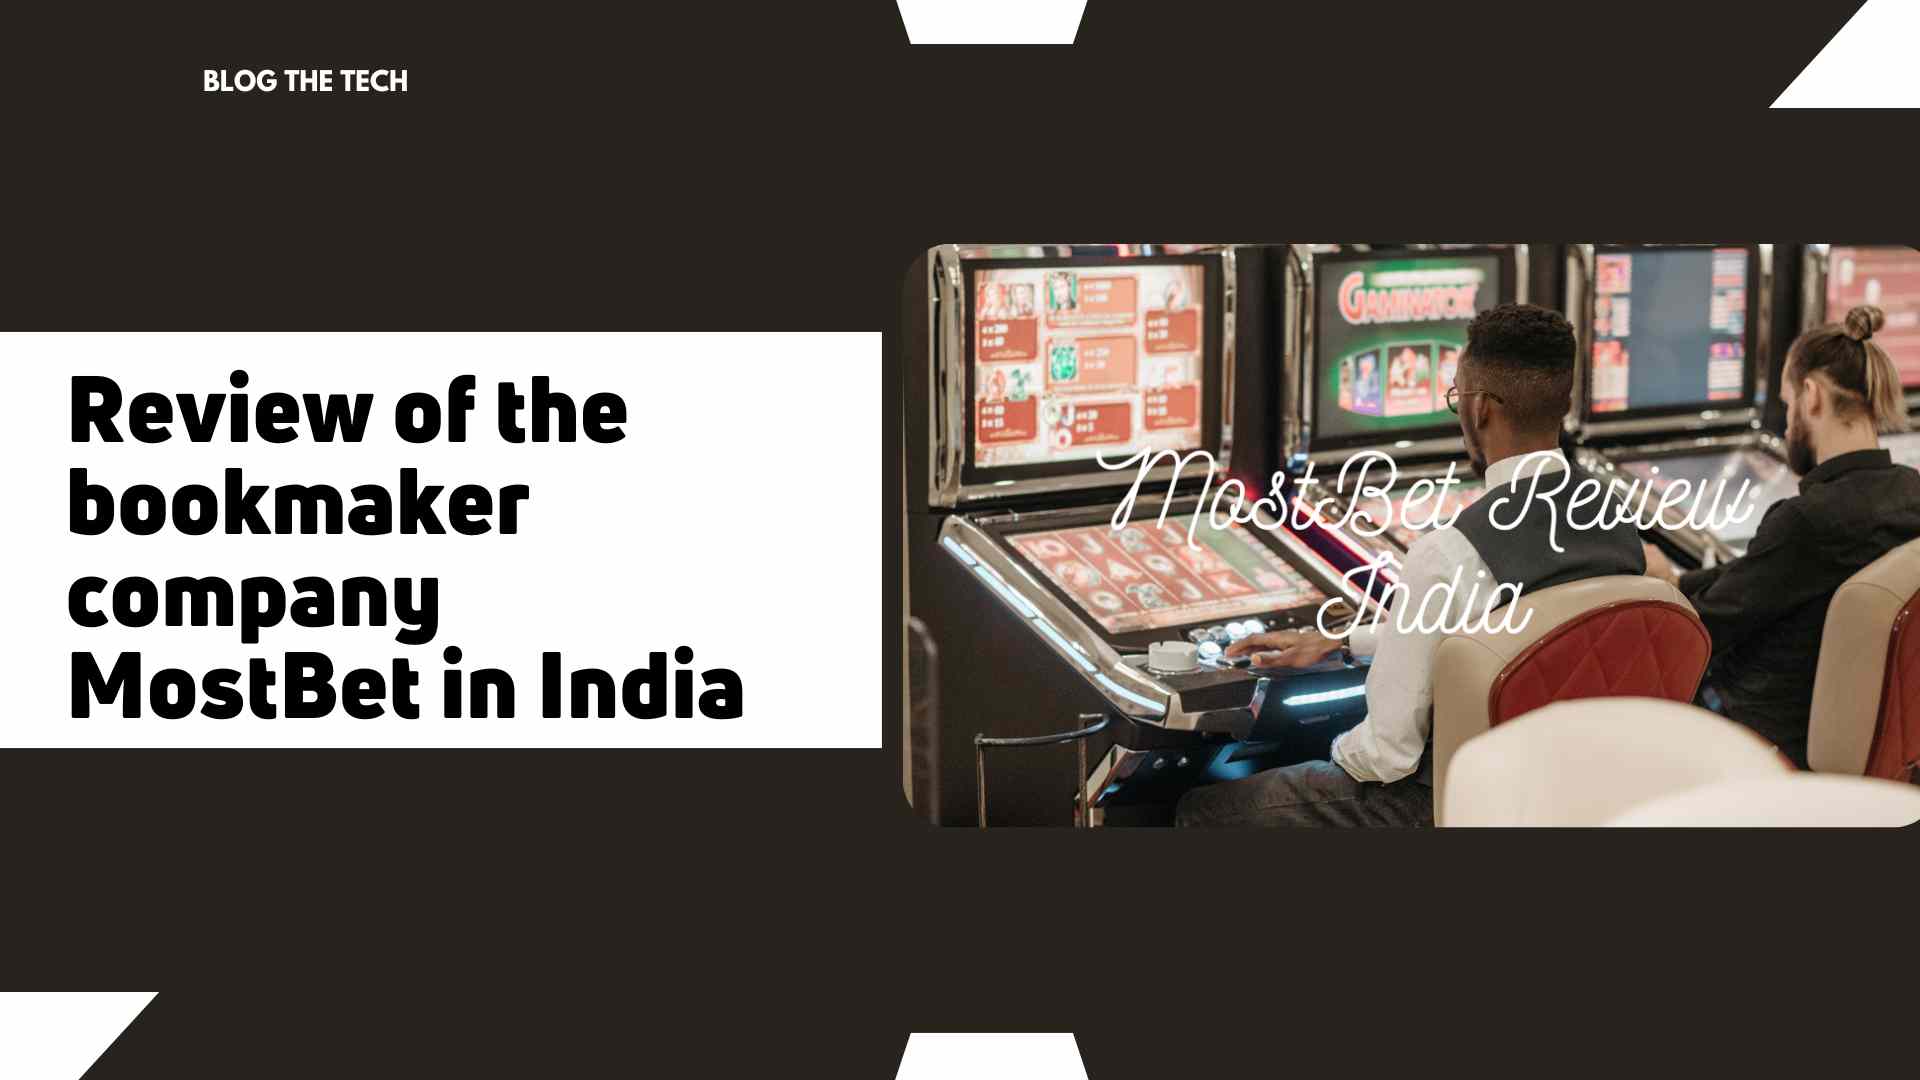 Review of the bookmaker company MostBet in India